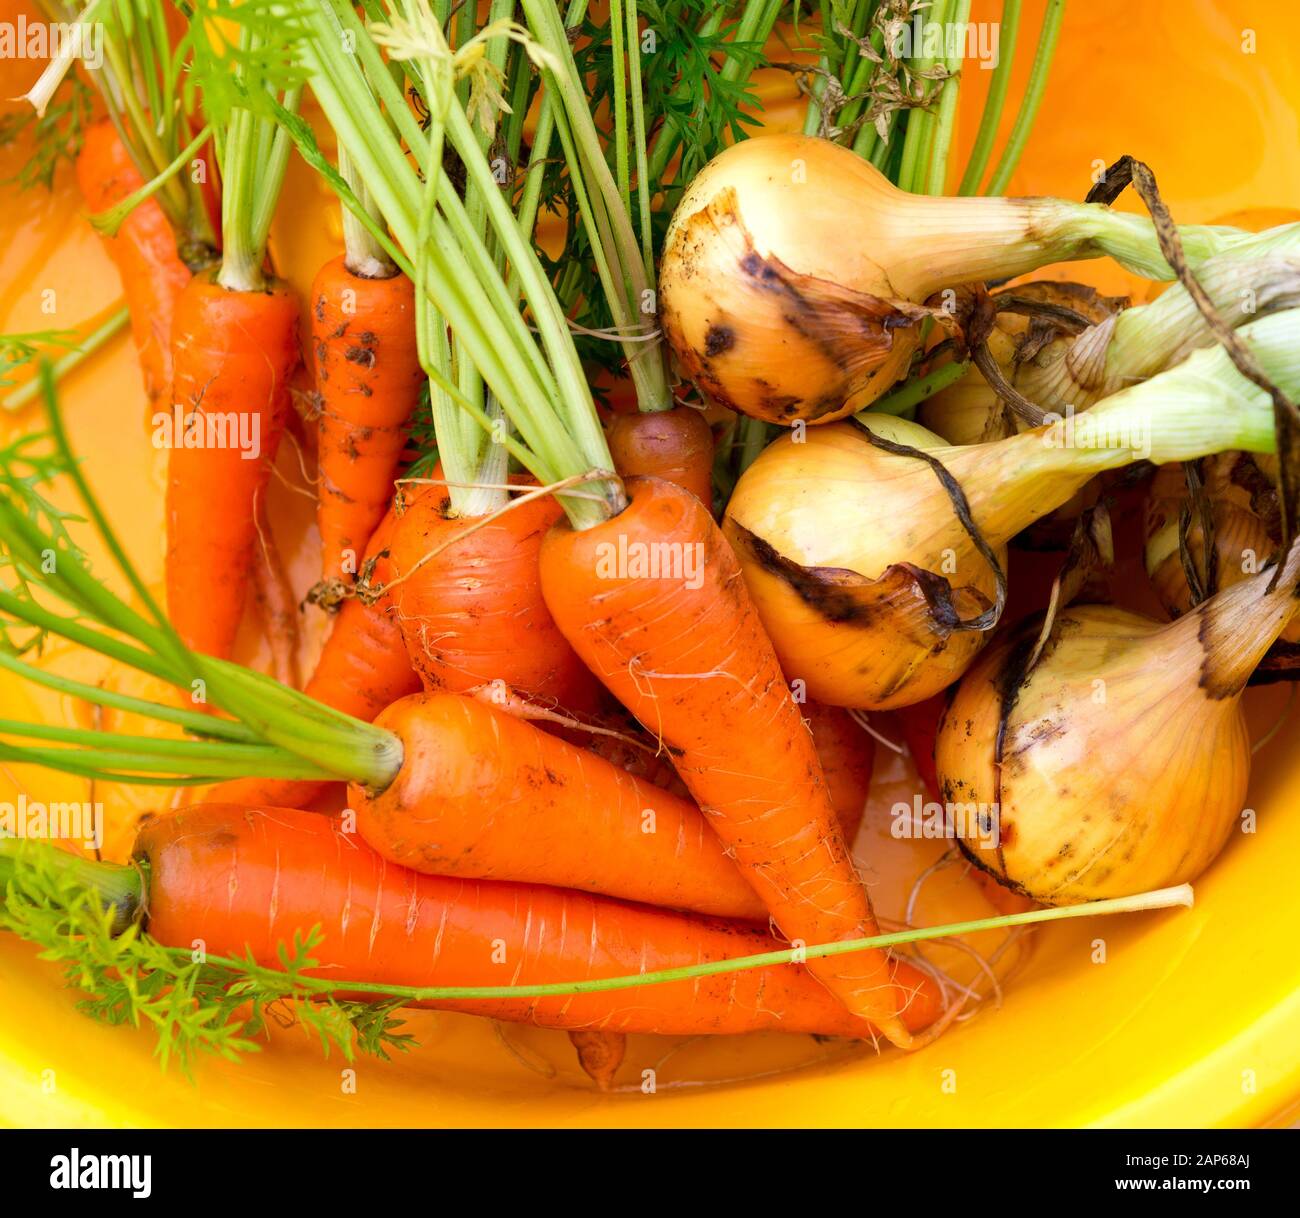 Fresh harvested vegetables, onion and carrots. Summer organic vegetables. Stock Photo